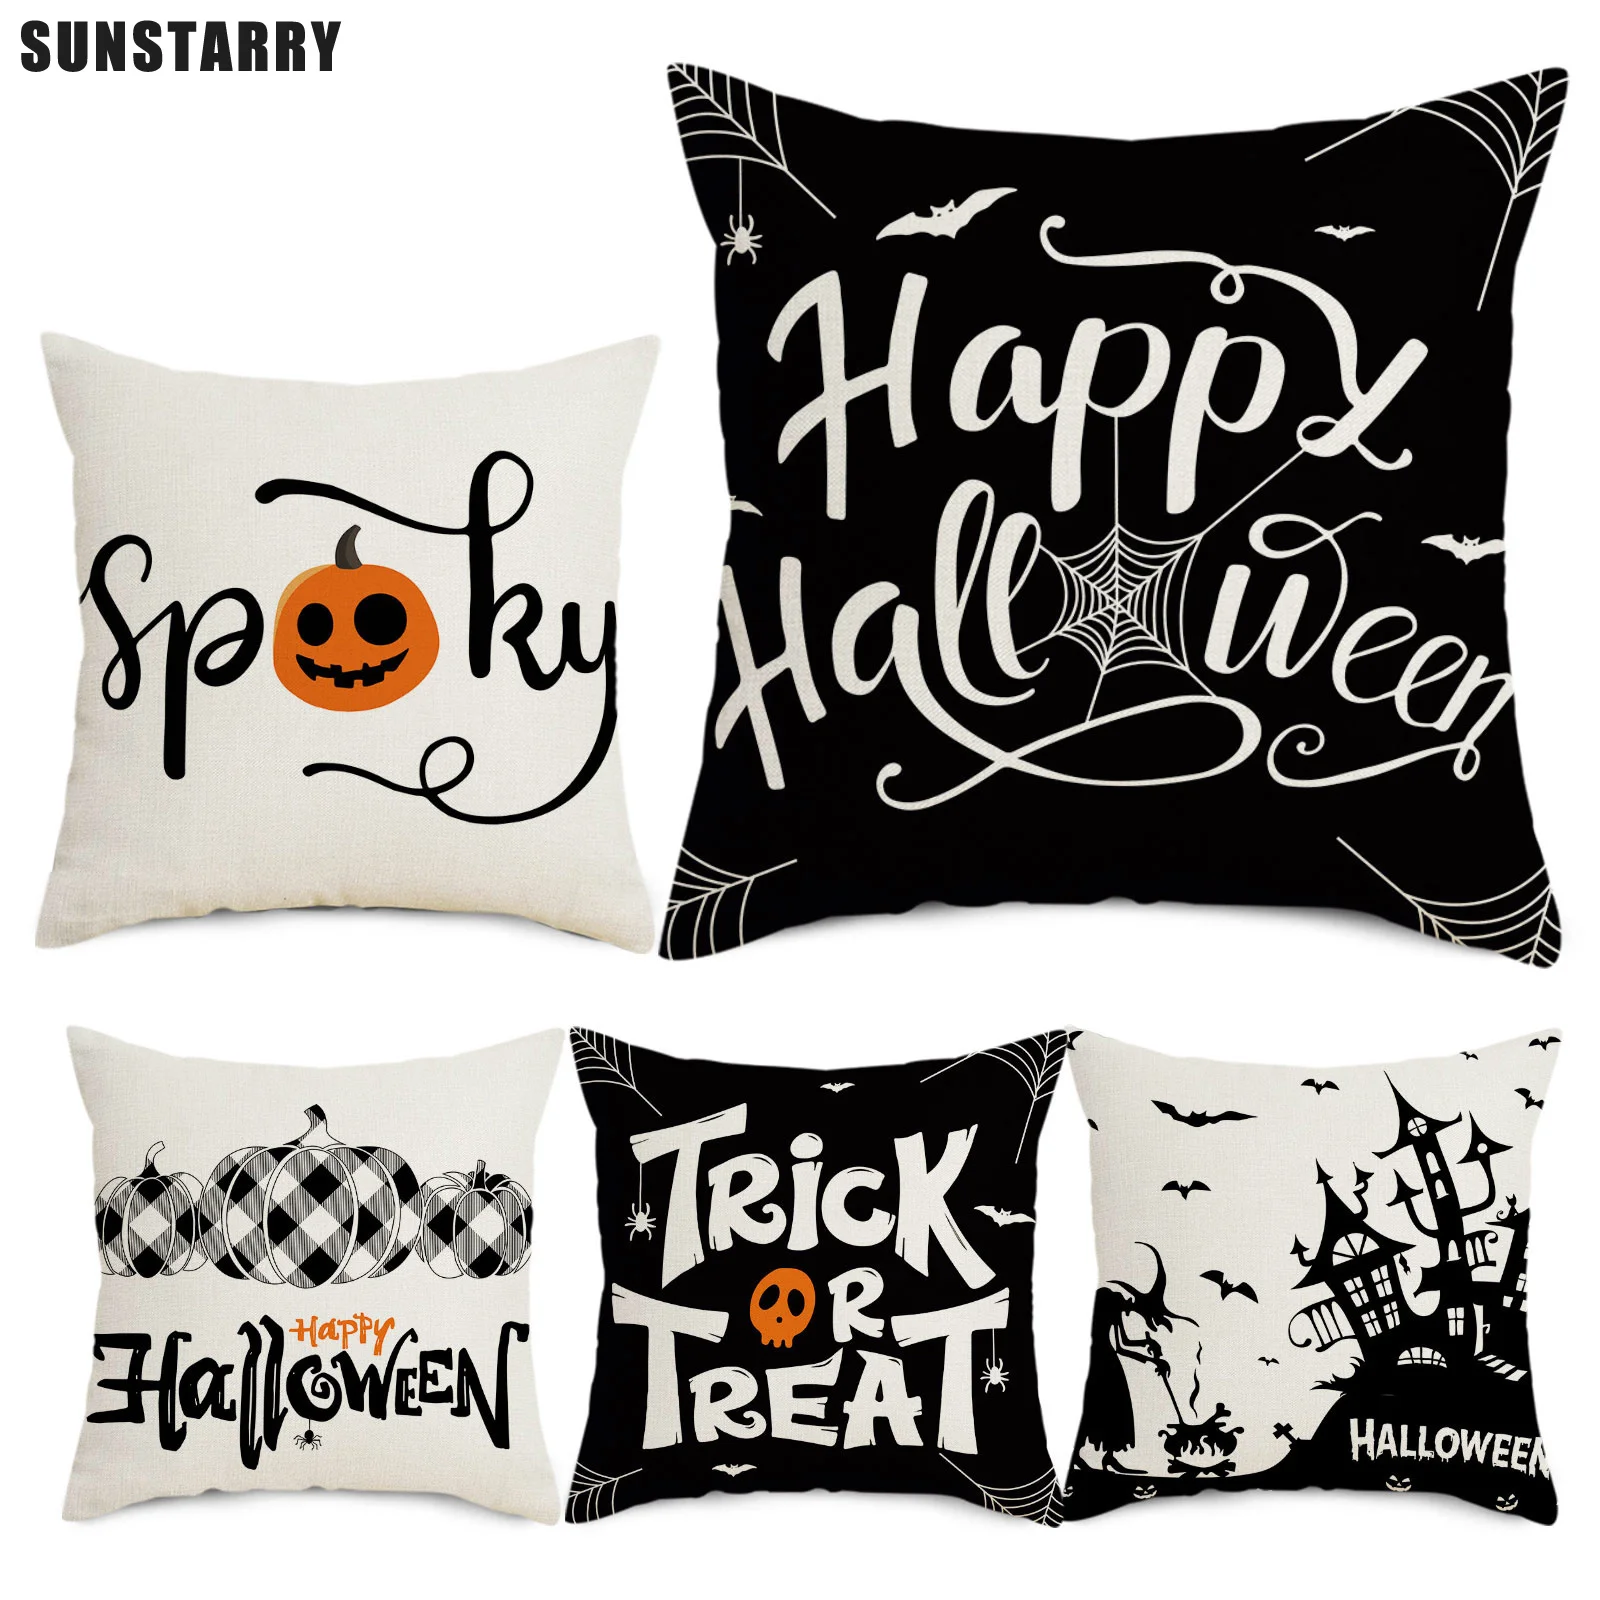 

Happy Halloween Cushion Cover Pumpkin Bat Ghost Printed Linen Pillow Cover Party Holiday DIY Decorations 45x45cm Funda Cojín